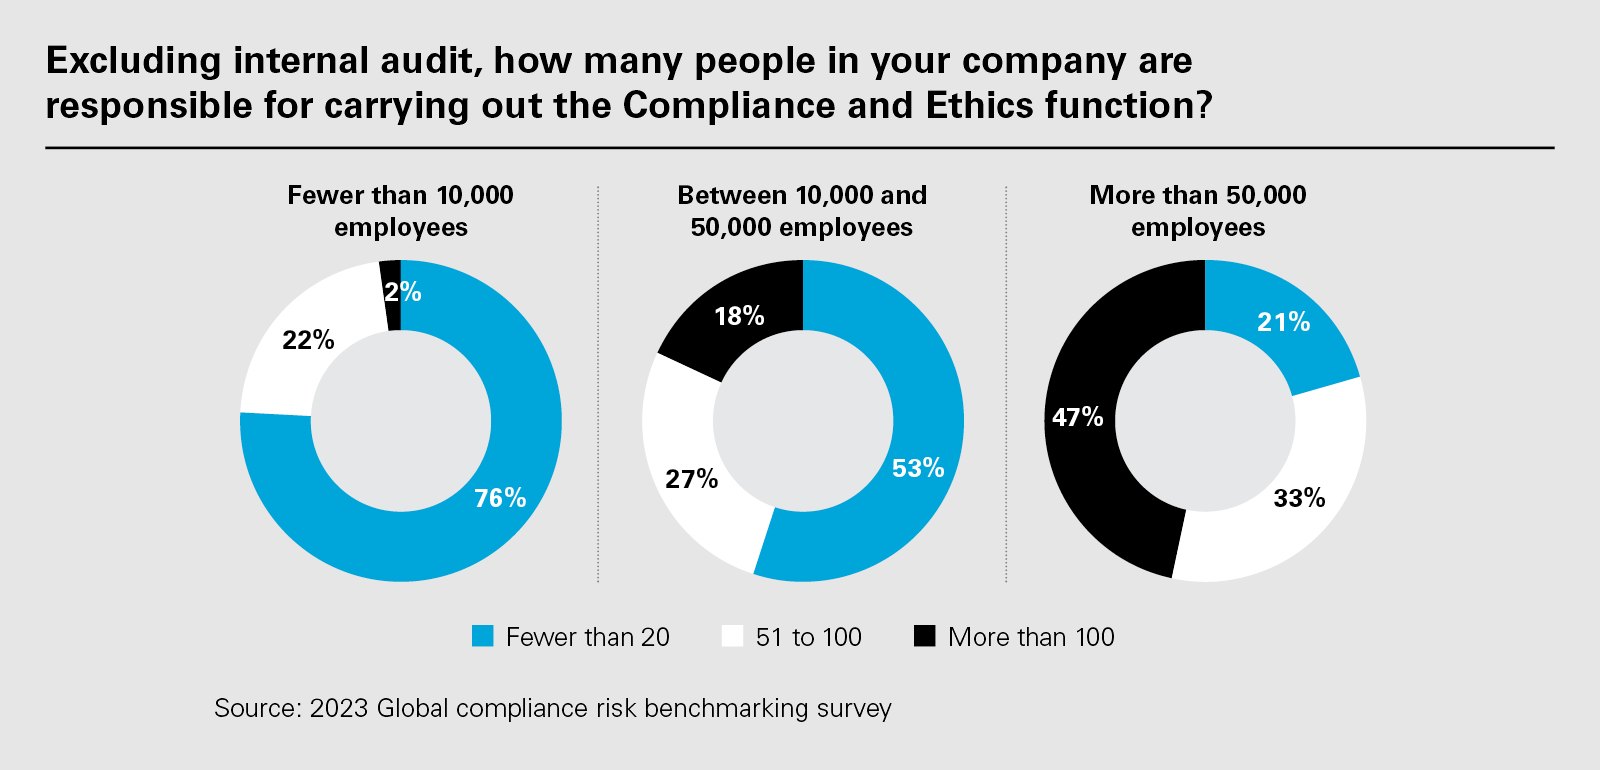 Excluding internal audit, how many people in your company are responsible for carrying out the Compliance and Ethics function?